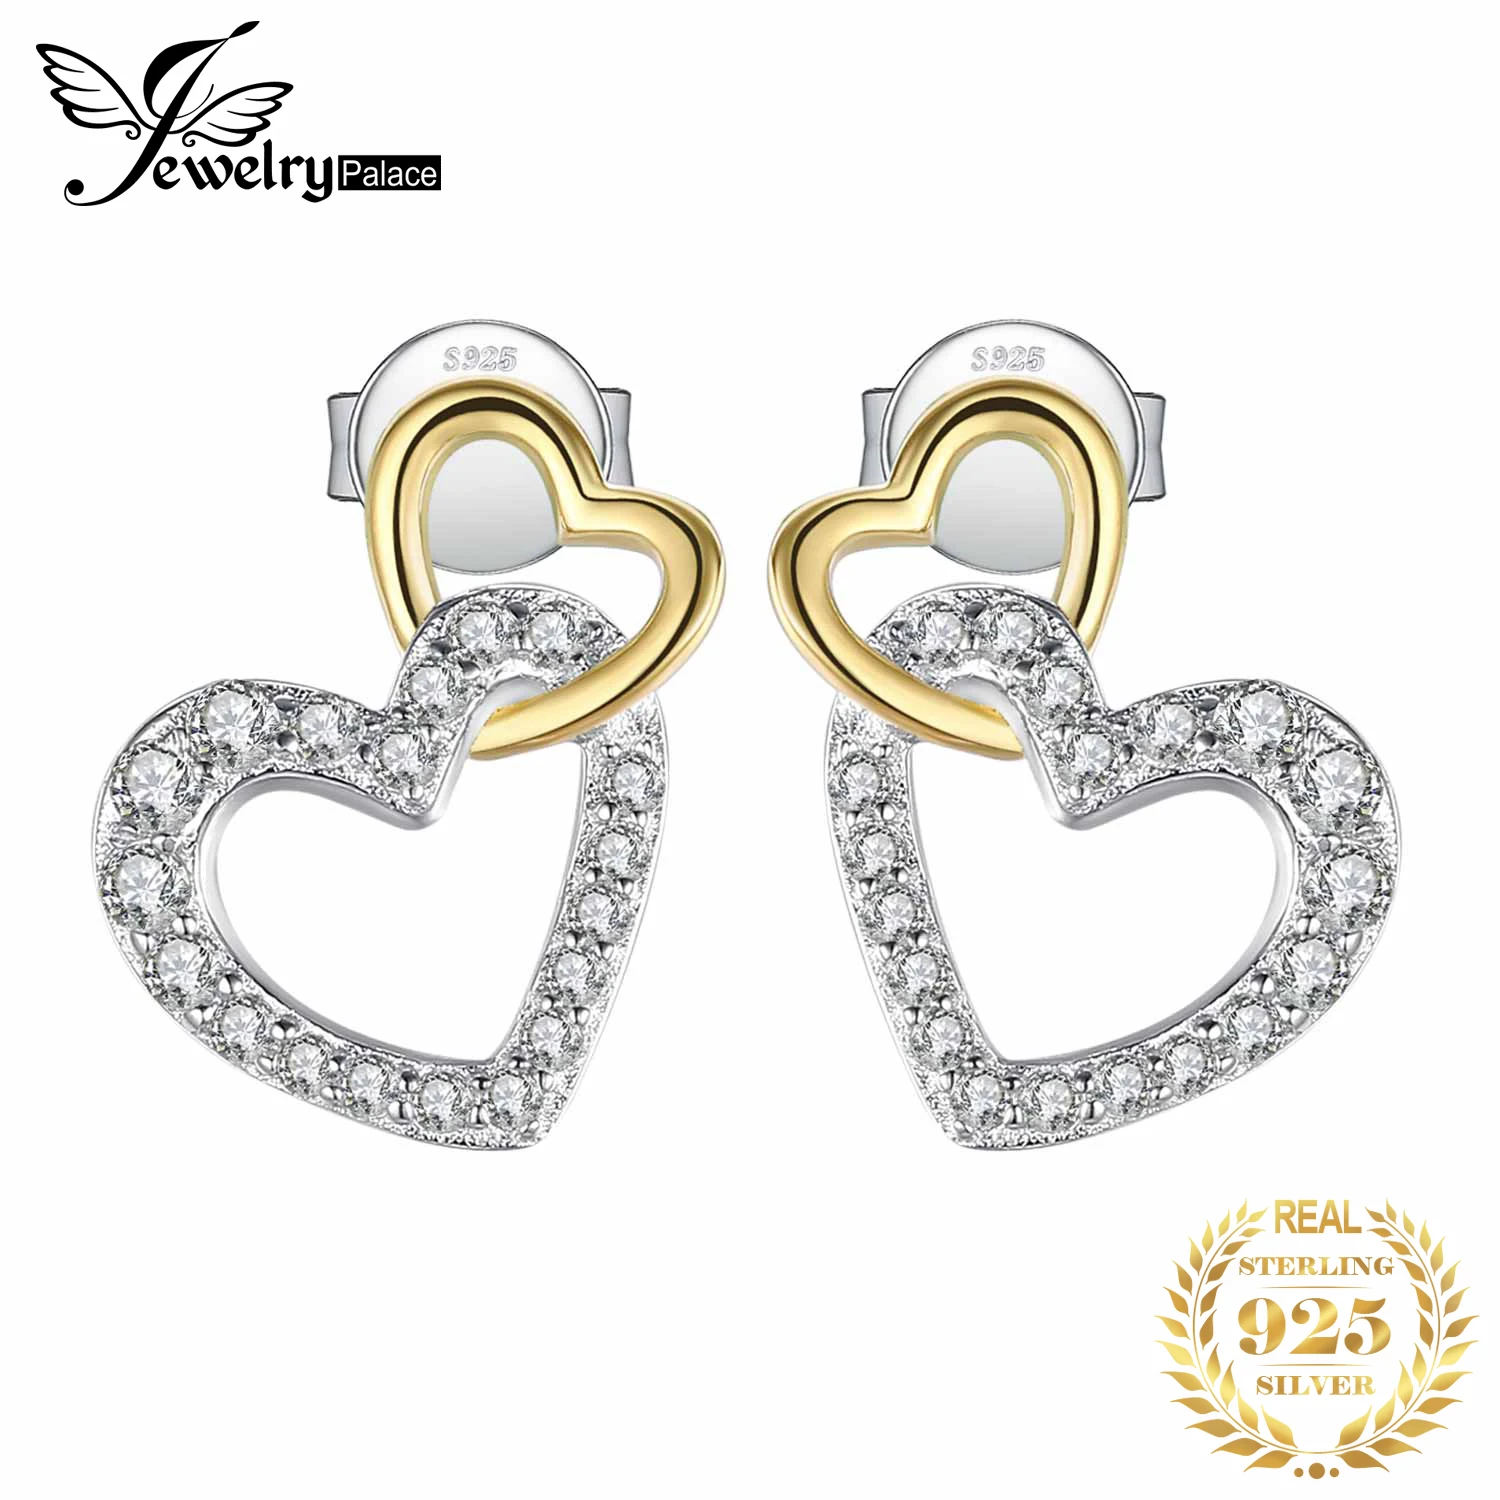 JewelryPalace Love Heart Gold 925 Sterling Silver Stud Earrings for Women Fashion Cubic Zirconia Simulated Diamond Earrings